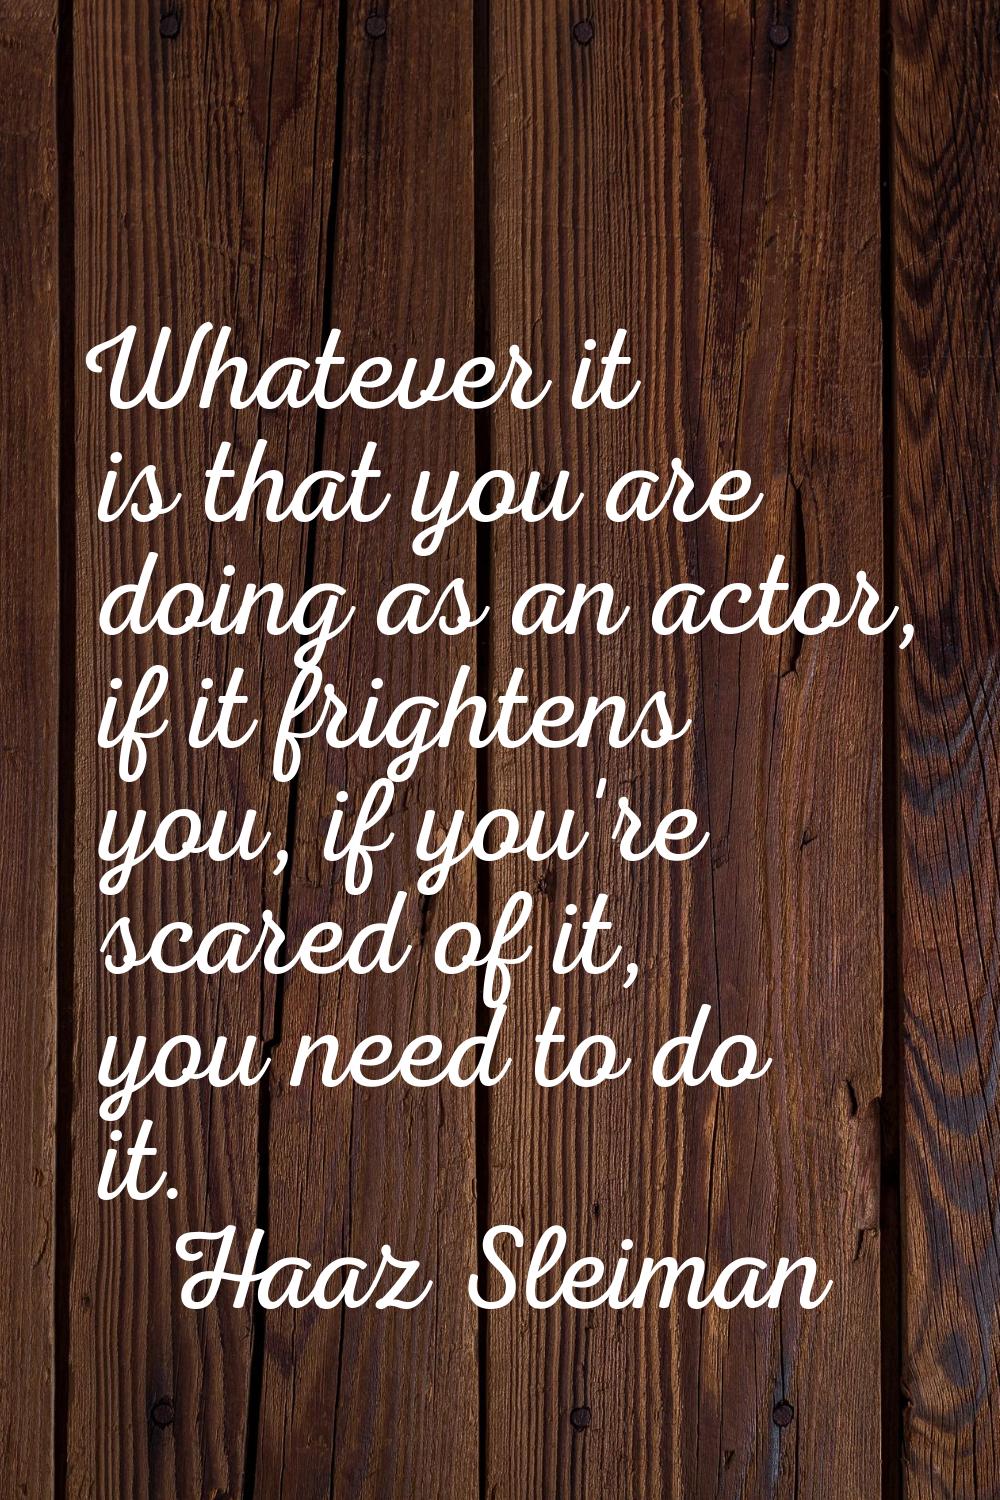 Whatever it is that you are doing as an actor, if it frightens you, if you're scared of it, you nee